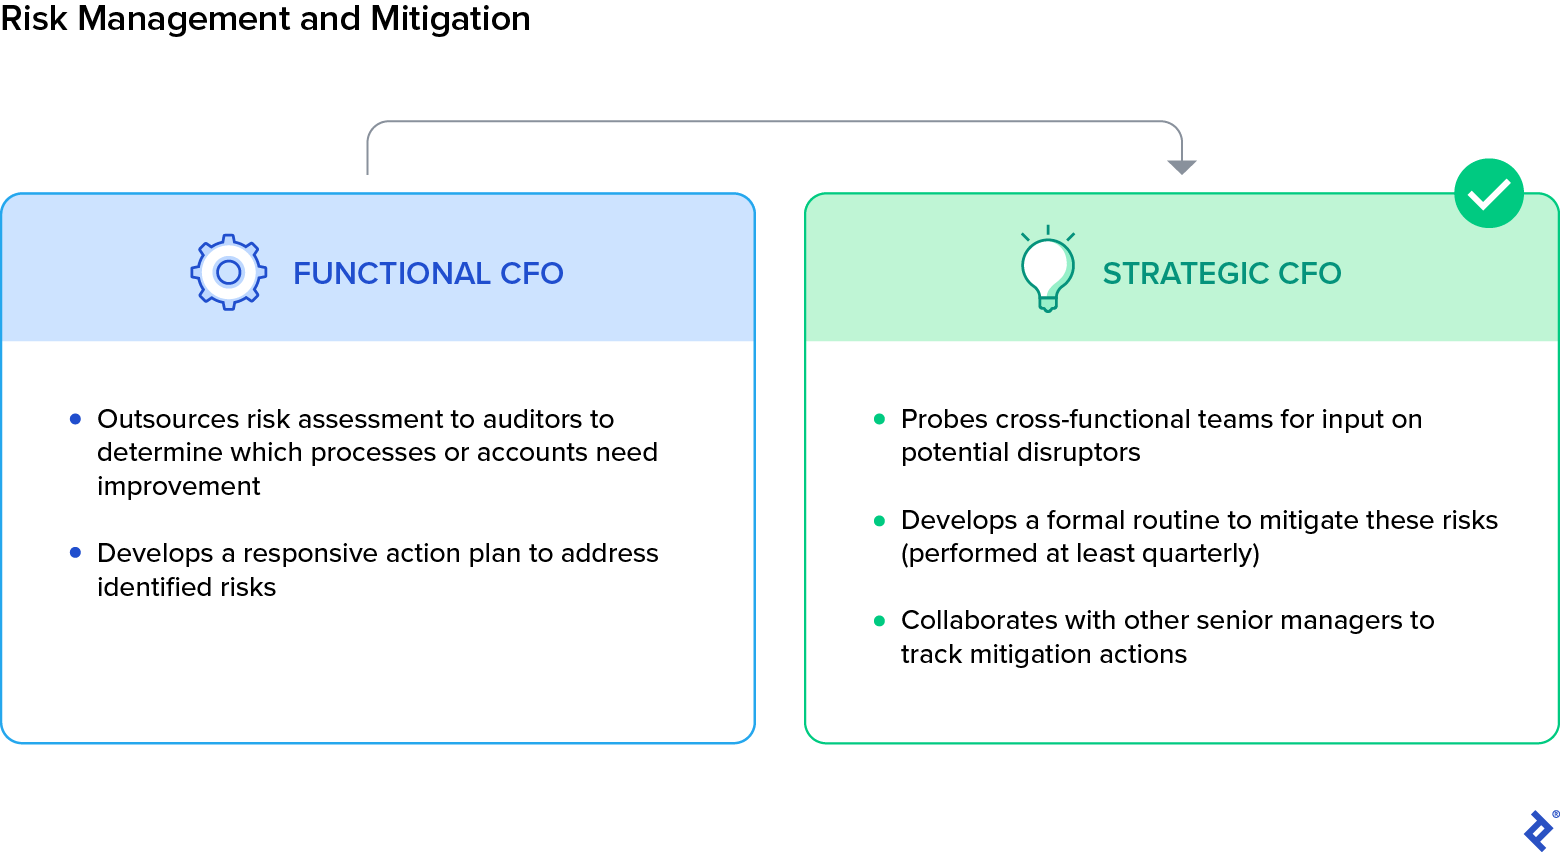 The functional CFO outsources risk assessment to auditors to determine what needs improvement and develops a responsive action plan to address identified risks. The strategic CFO probes cross-functional teams for input on potential disruptors, develops a formal routine to mitigate these risks, and collaborates with other senior managers to track mitigation actions.